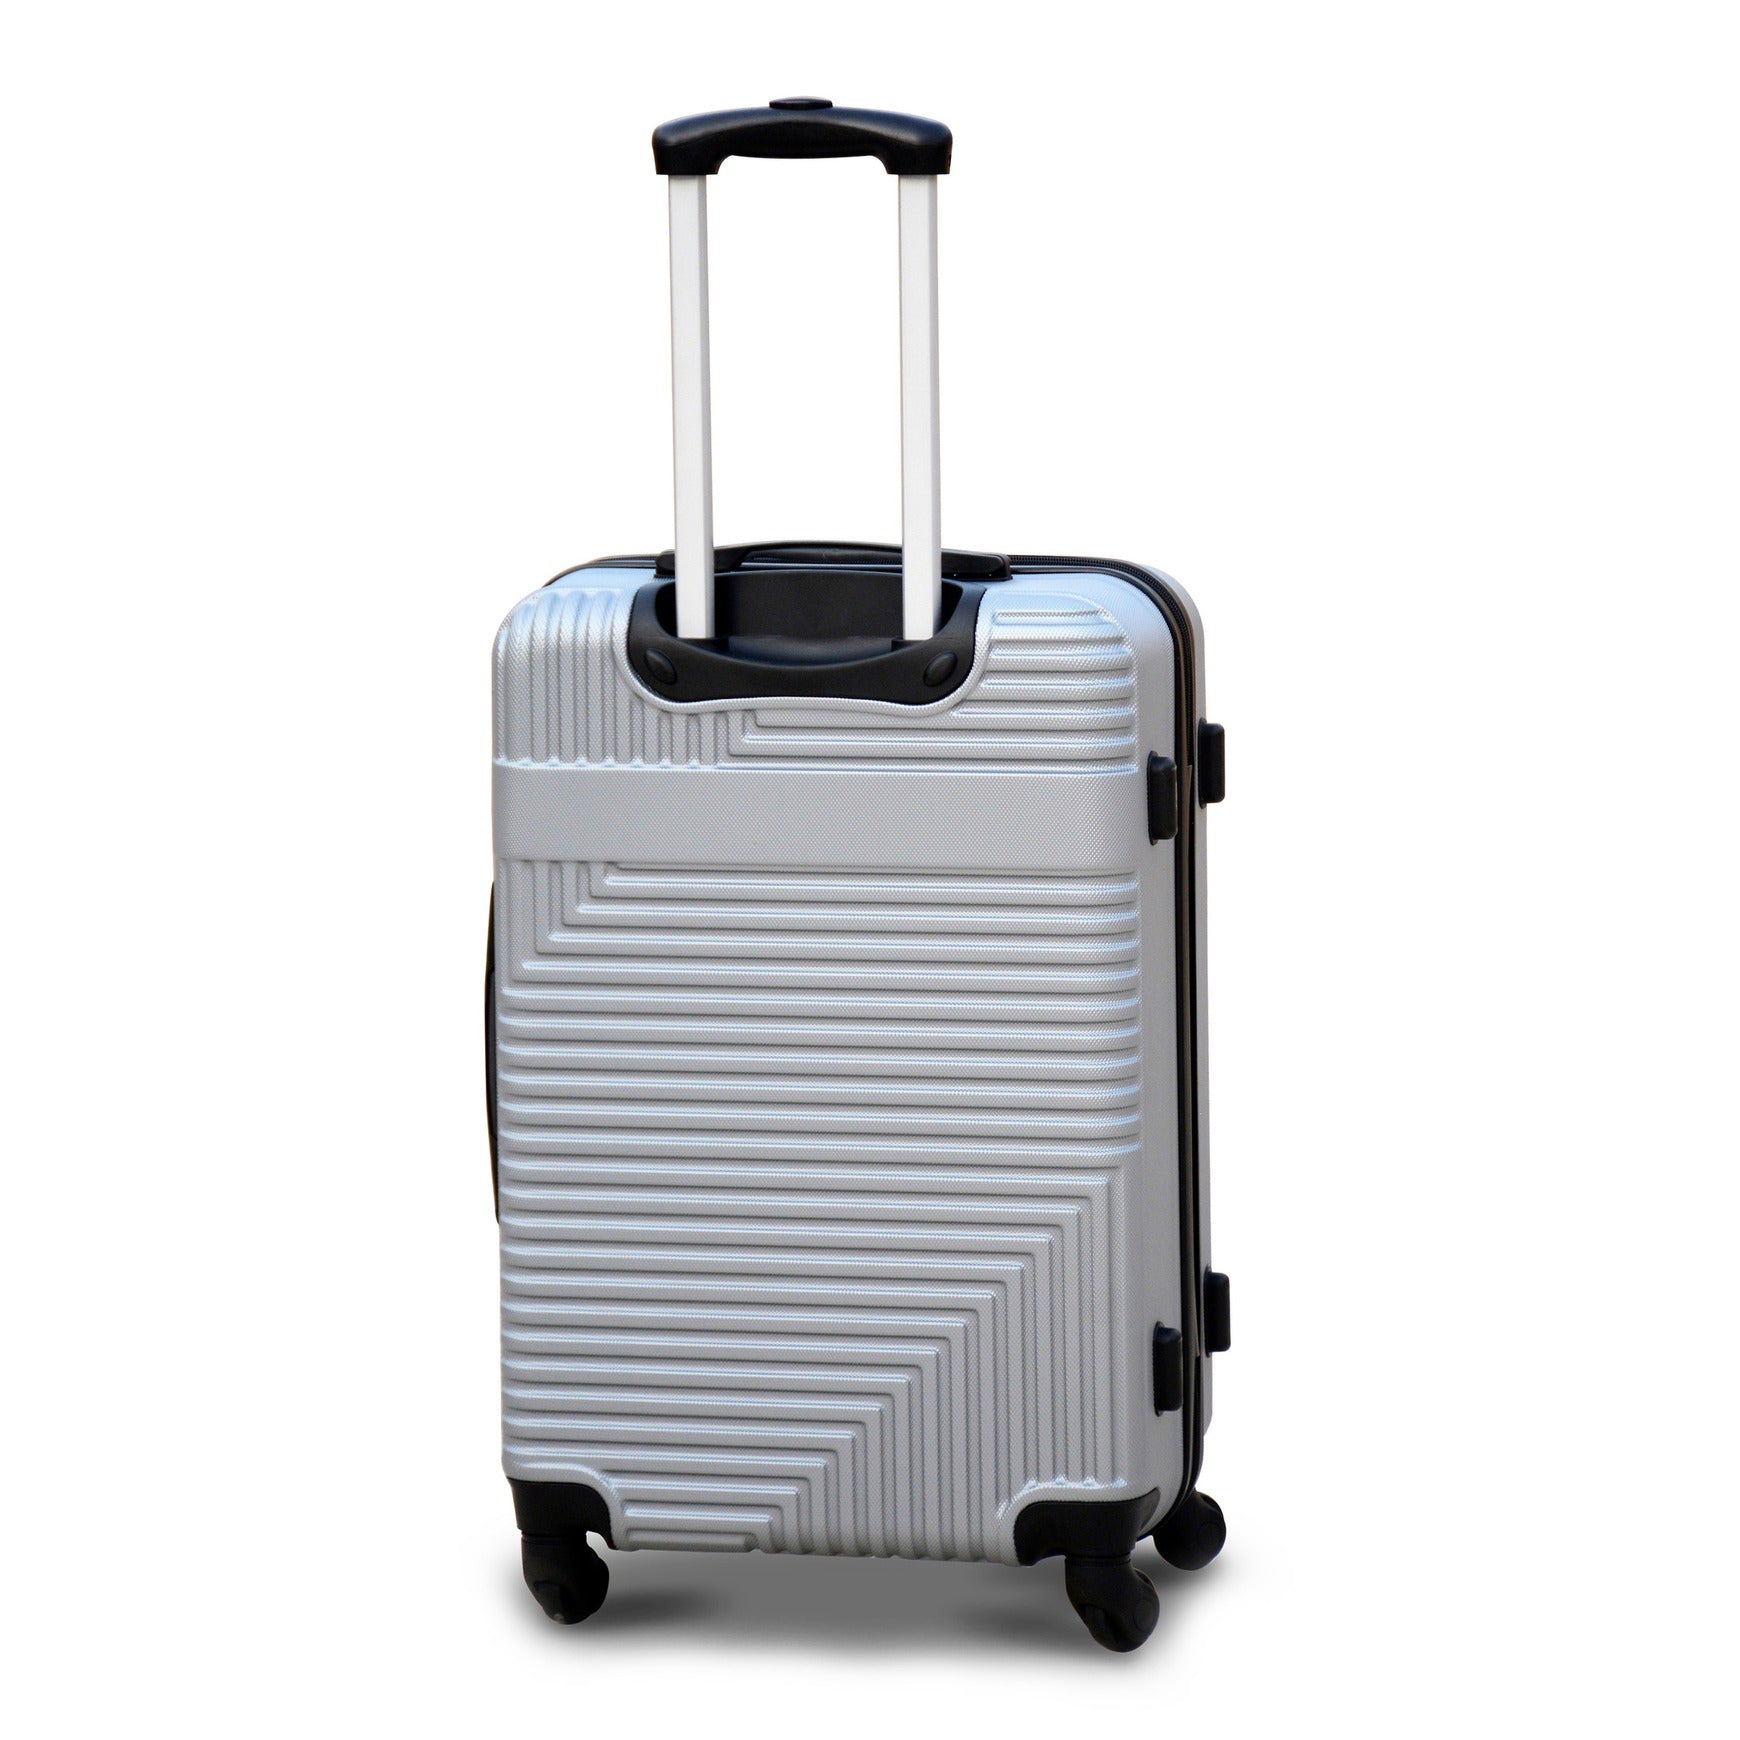 3 Piece Set 20" 24" 28 Inches Silver Colour Travel Way ABS lightweight Luggage Hard Case Trolley Bag | 2 Year Warranty